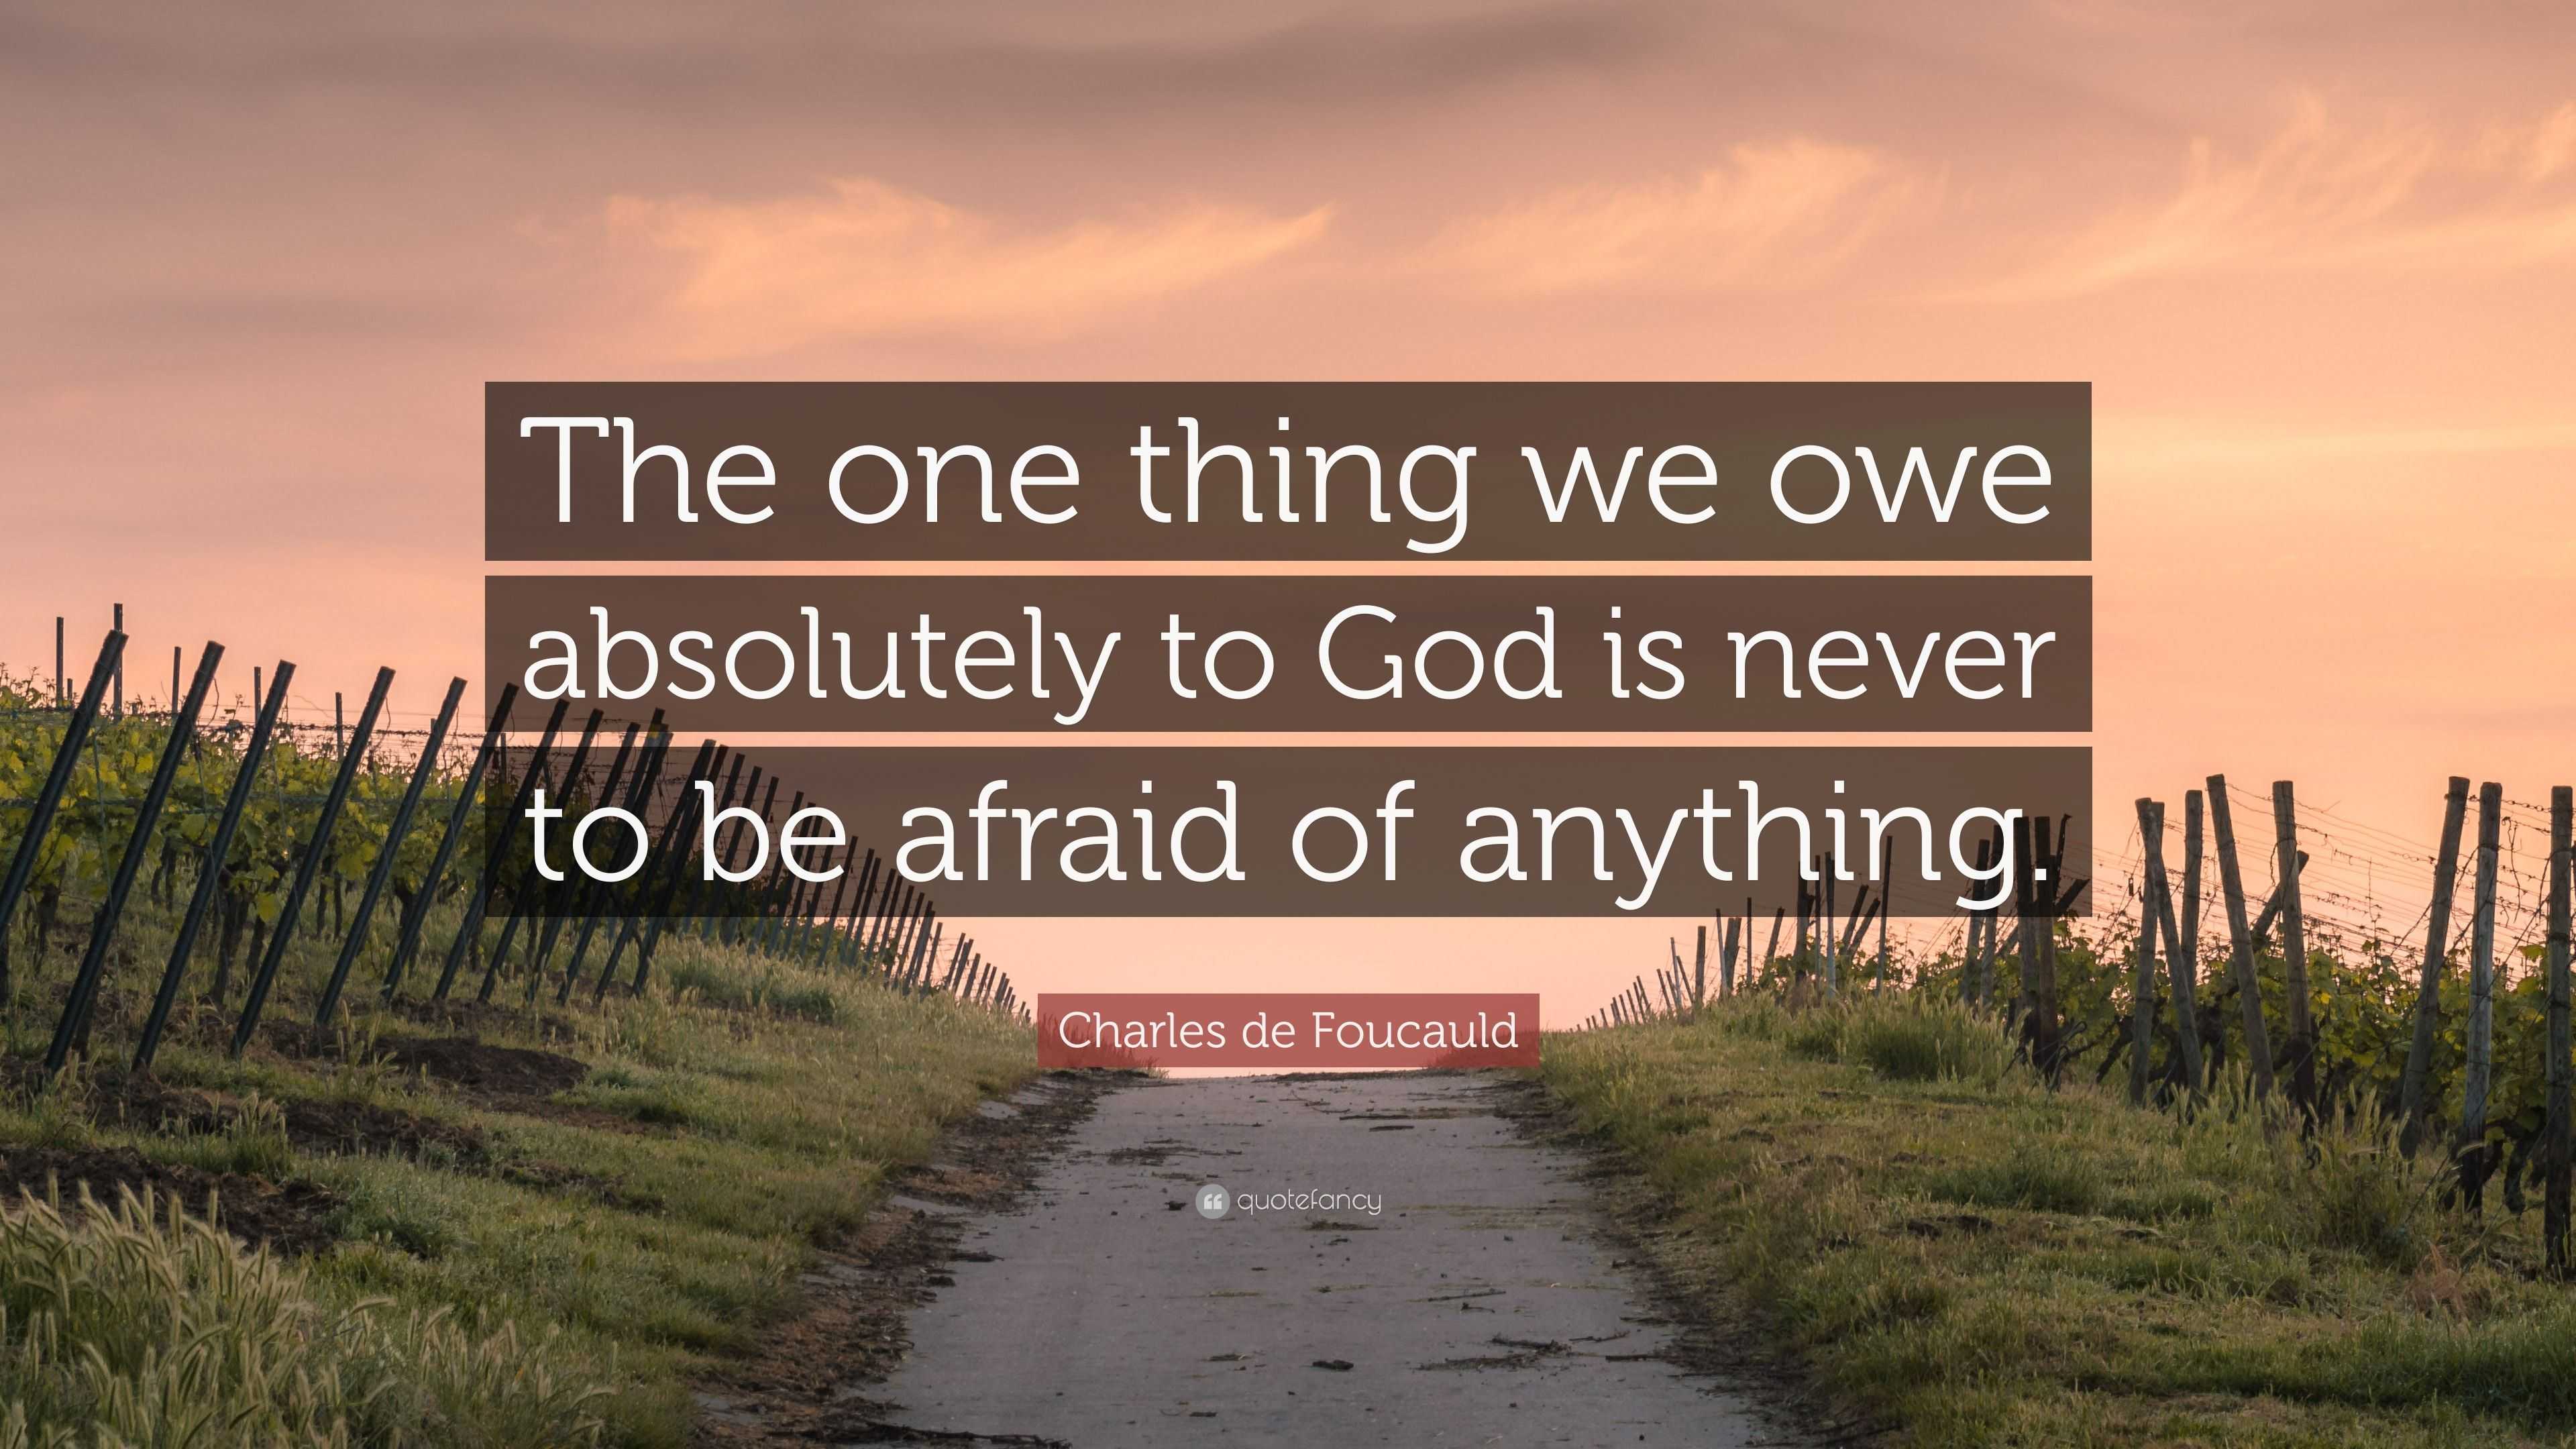 Charles de Foucauld Quote: “The one thing we owe absolutely to God is ...